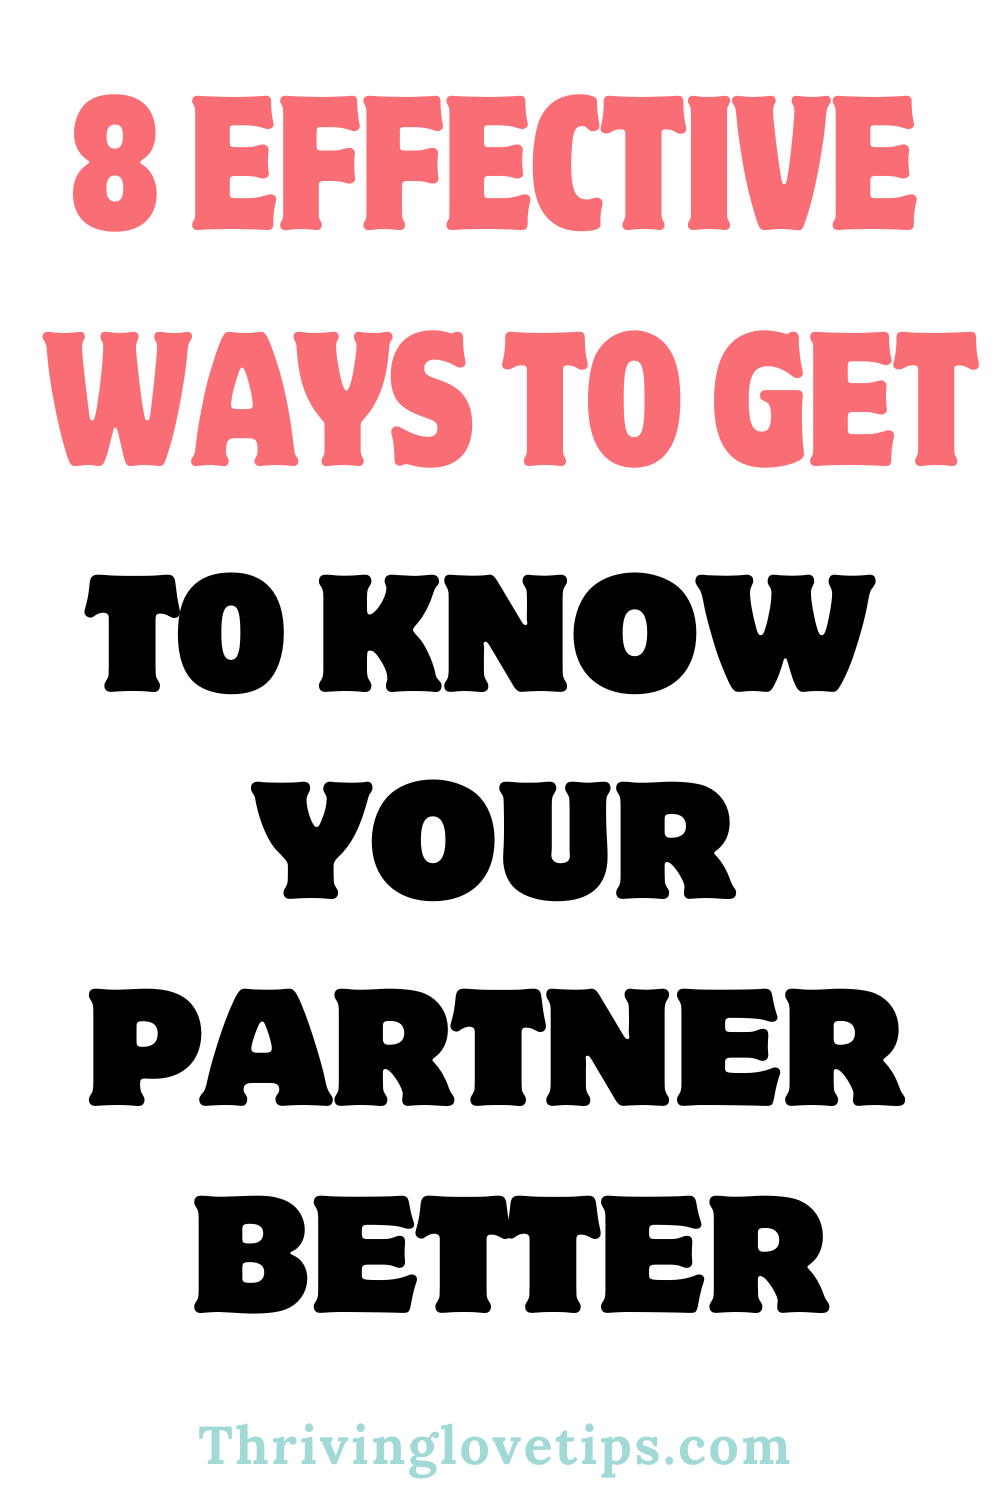 Getting to know your partner